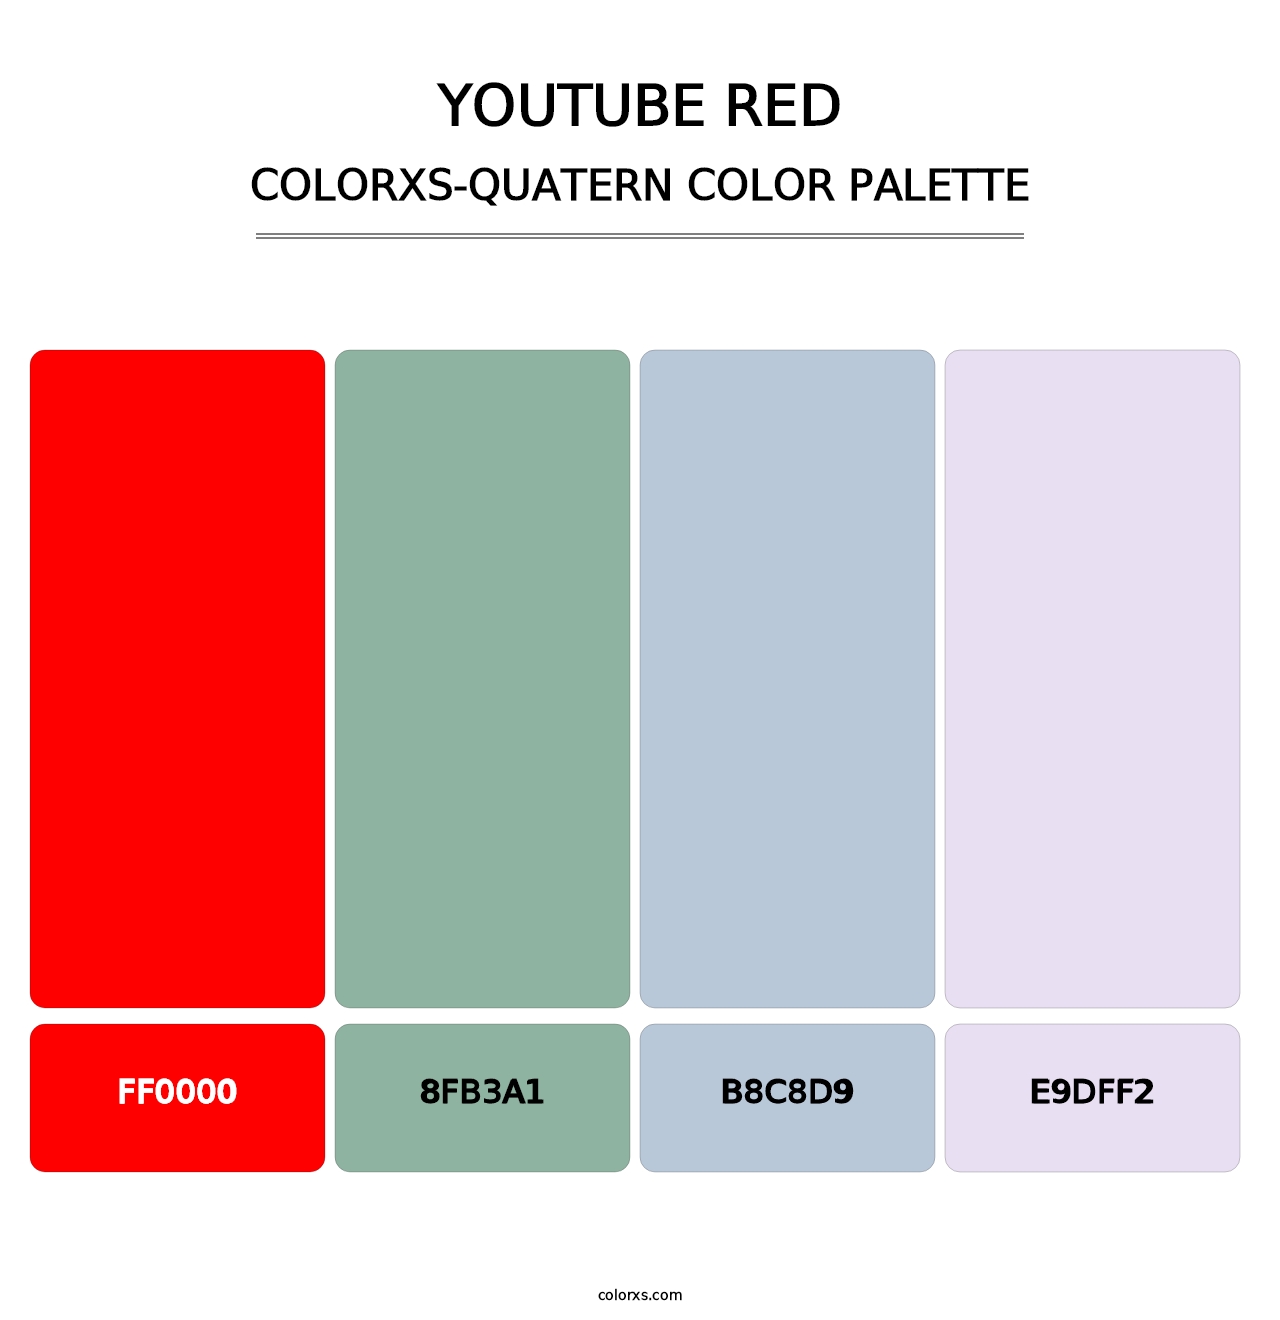 YouTube Red - Colorxs Quatern Palette